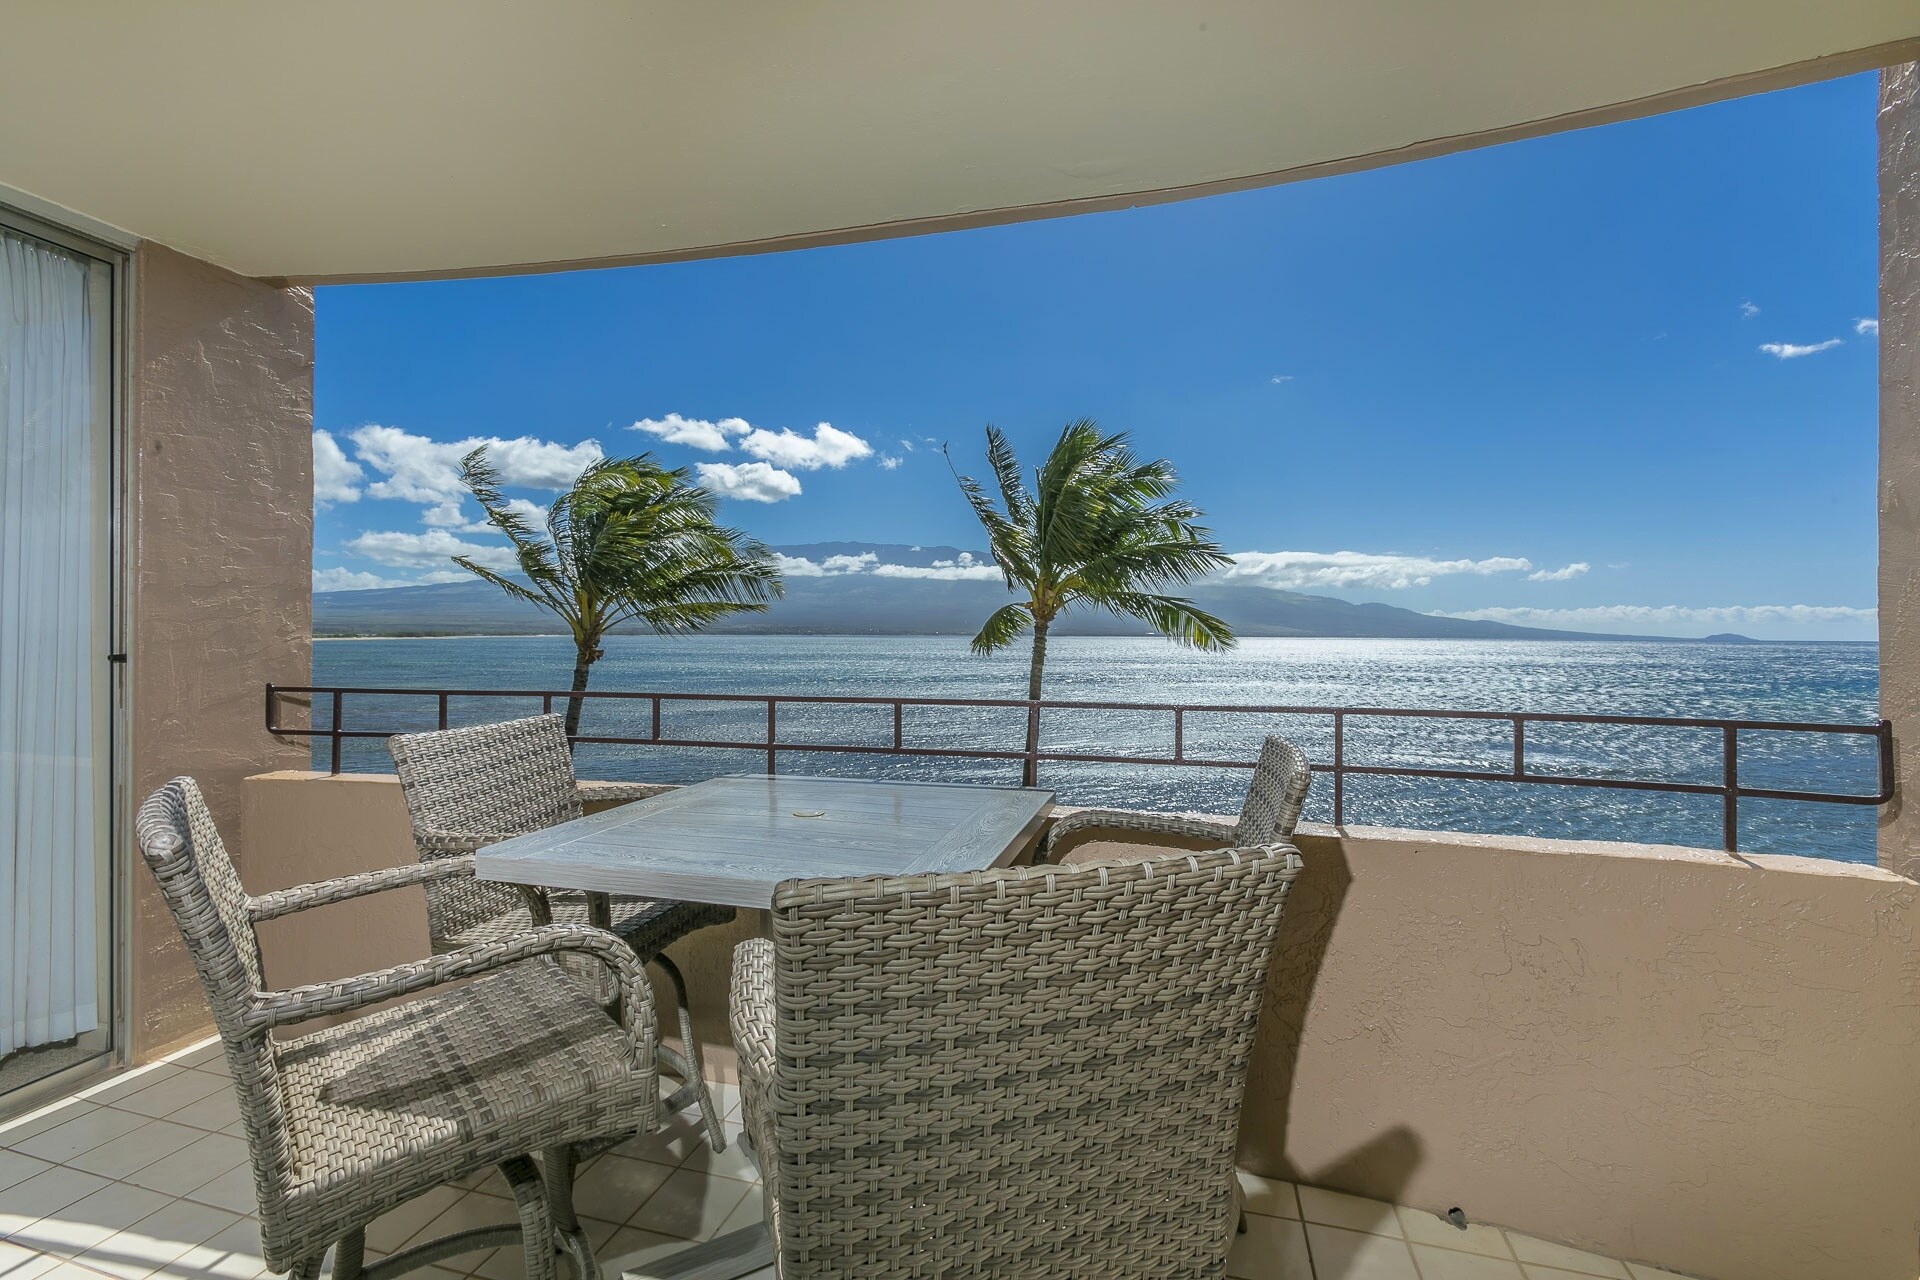 Enjoy dining on the lanai with the beautiful ocean view!